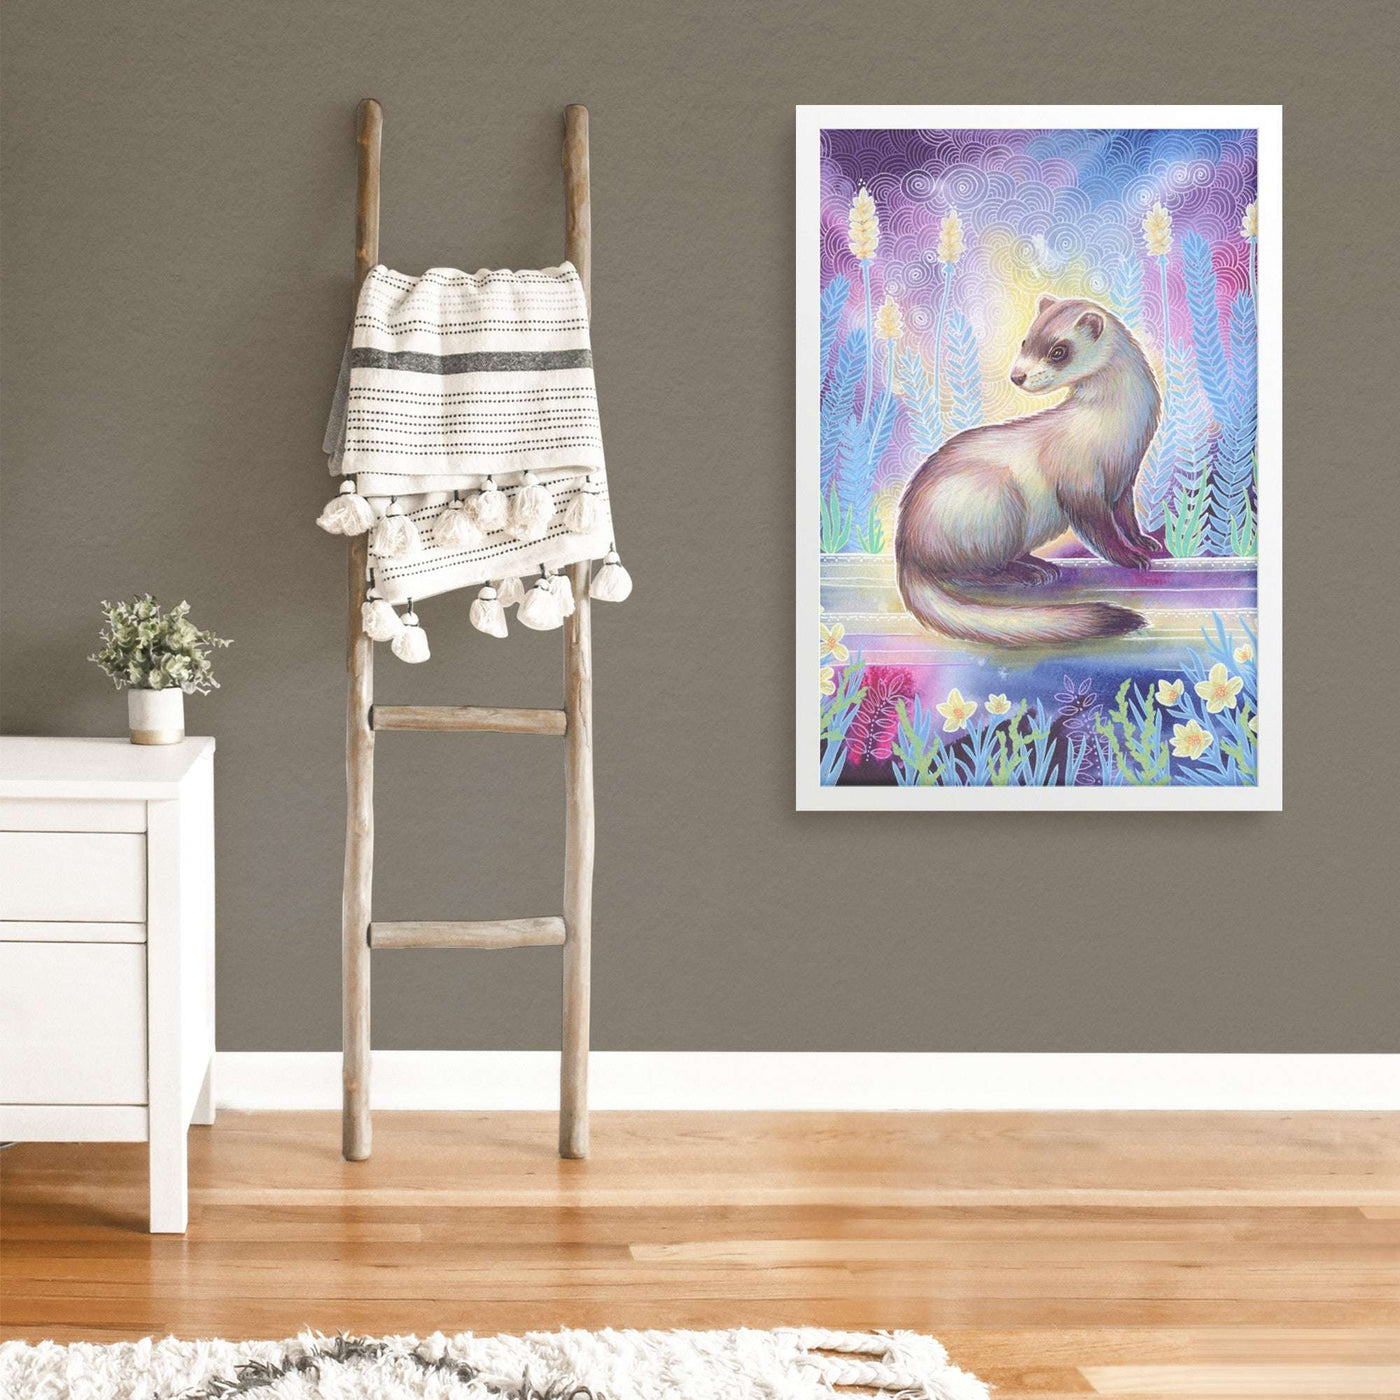 A Framed Ferret Print hung on a gray wall featuring a colorful ferret painting with flowers and intricate patterns.